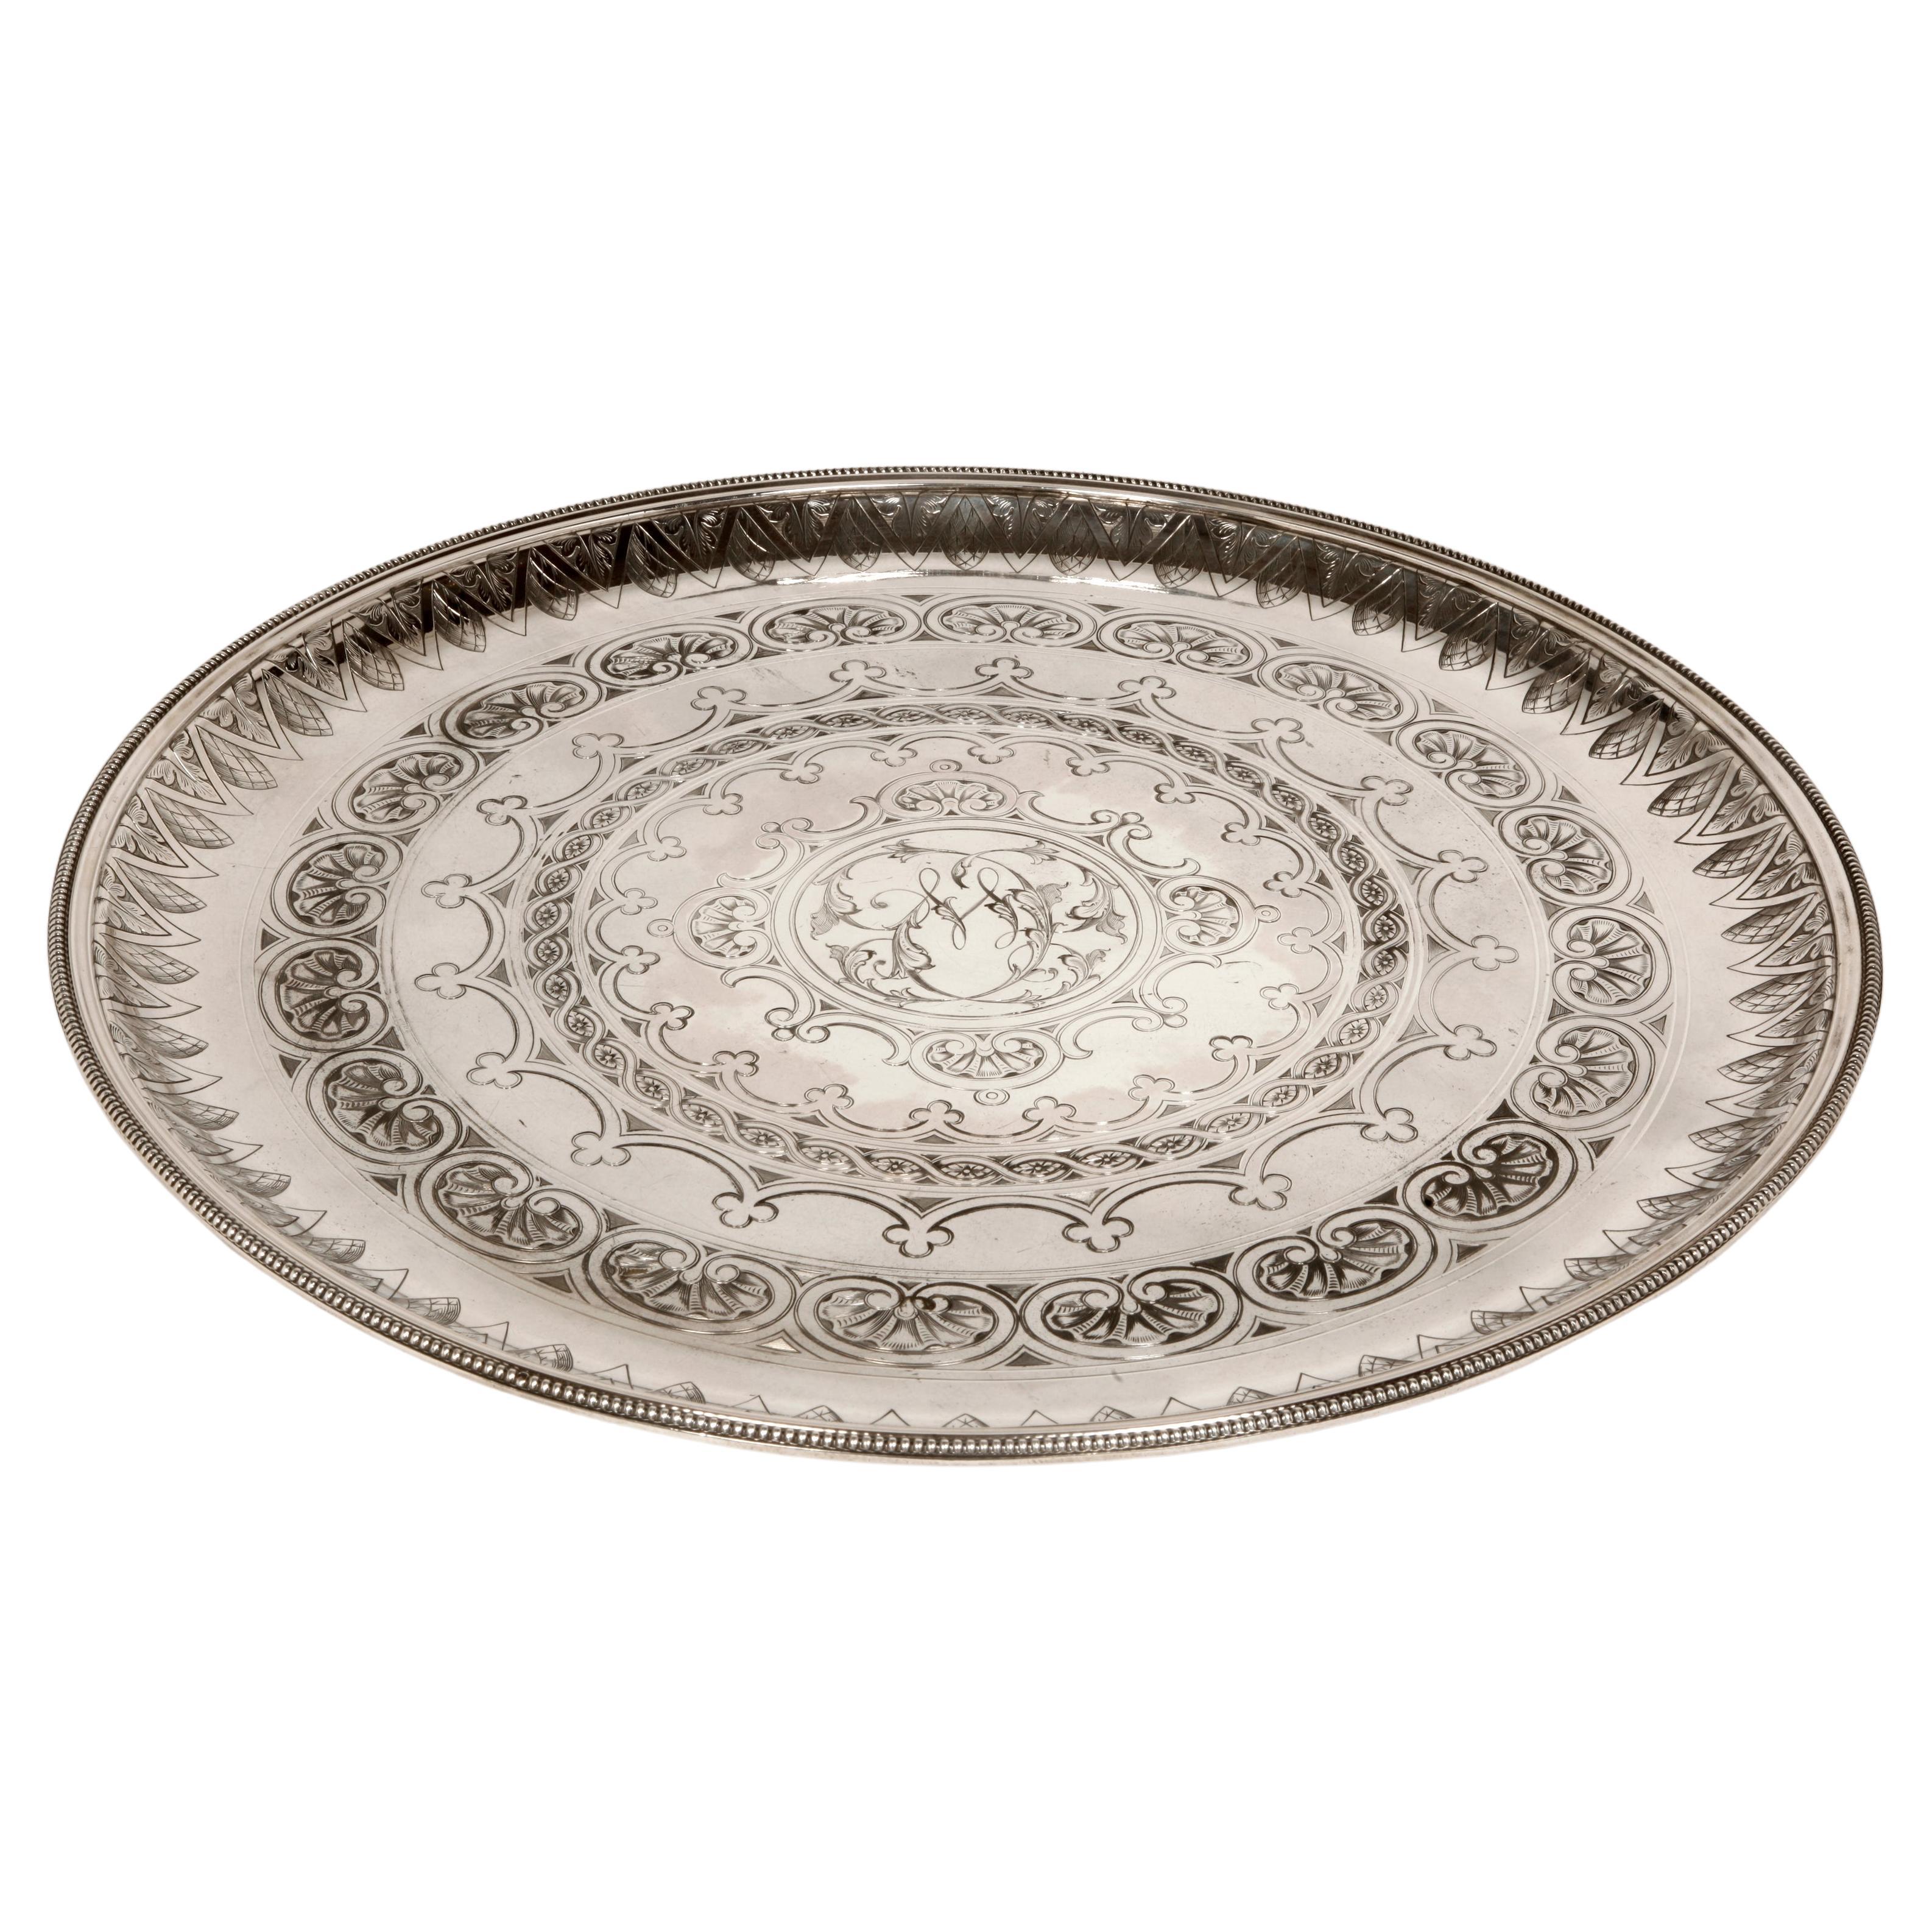 Orfèvre Cartier A Paris - Round Tray 50 Cm In Sterling Silver Early Twentieth For Sale